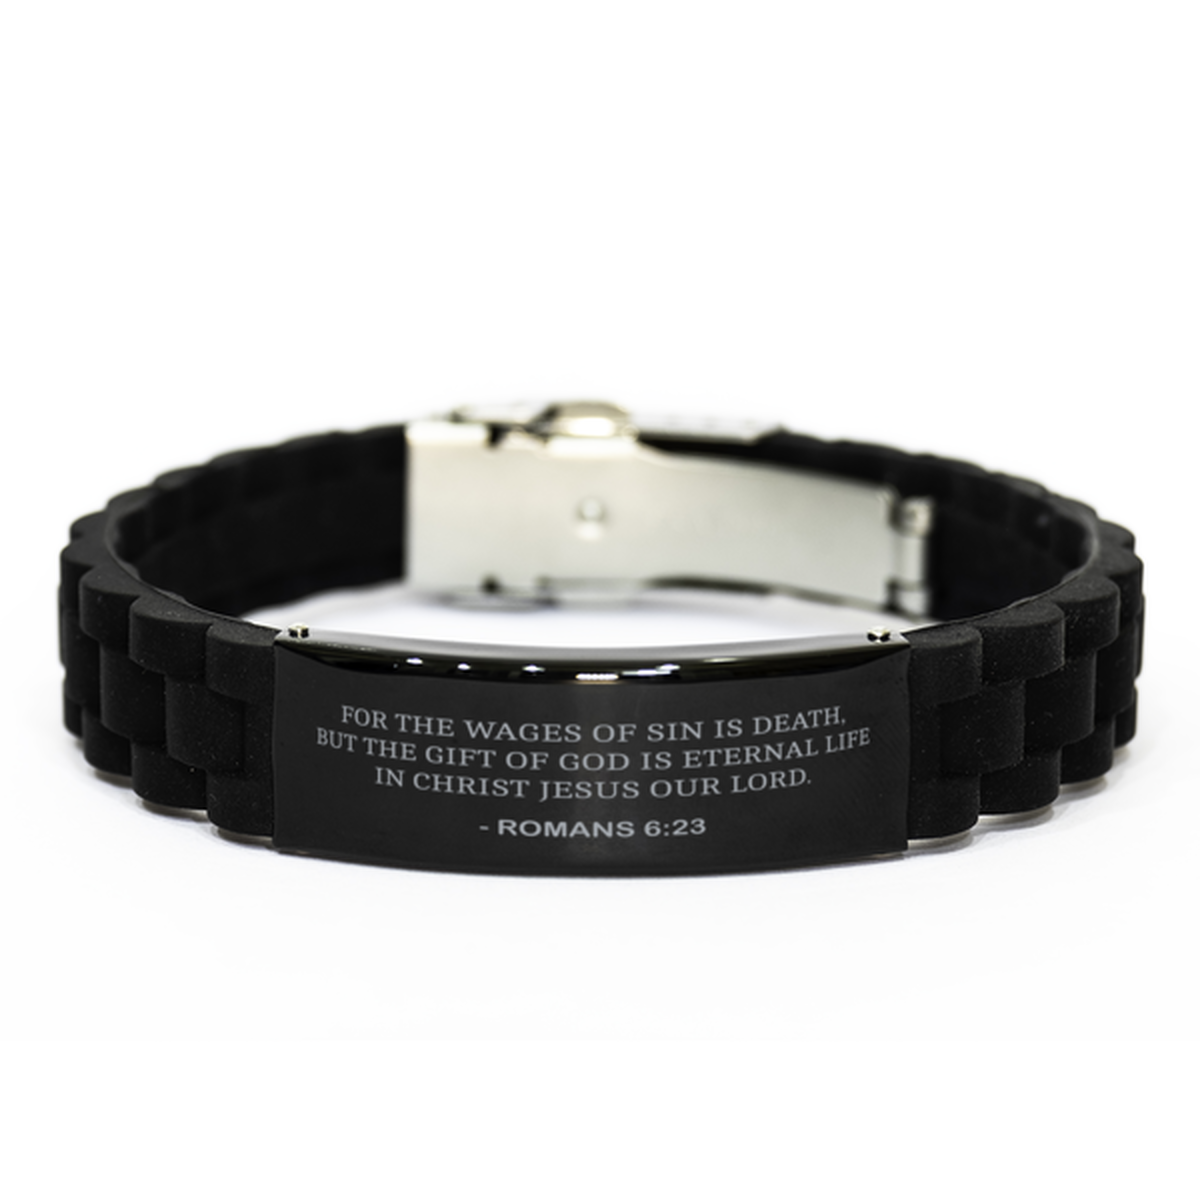 Bible Verse Black Bracelet,, Romans 6:23 For The Wages Of Sin Is Death, But The Gift Of, Inspirational Christian Gifts For Men Women